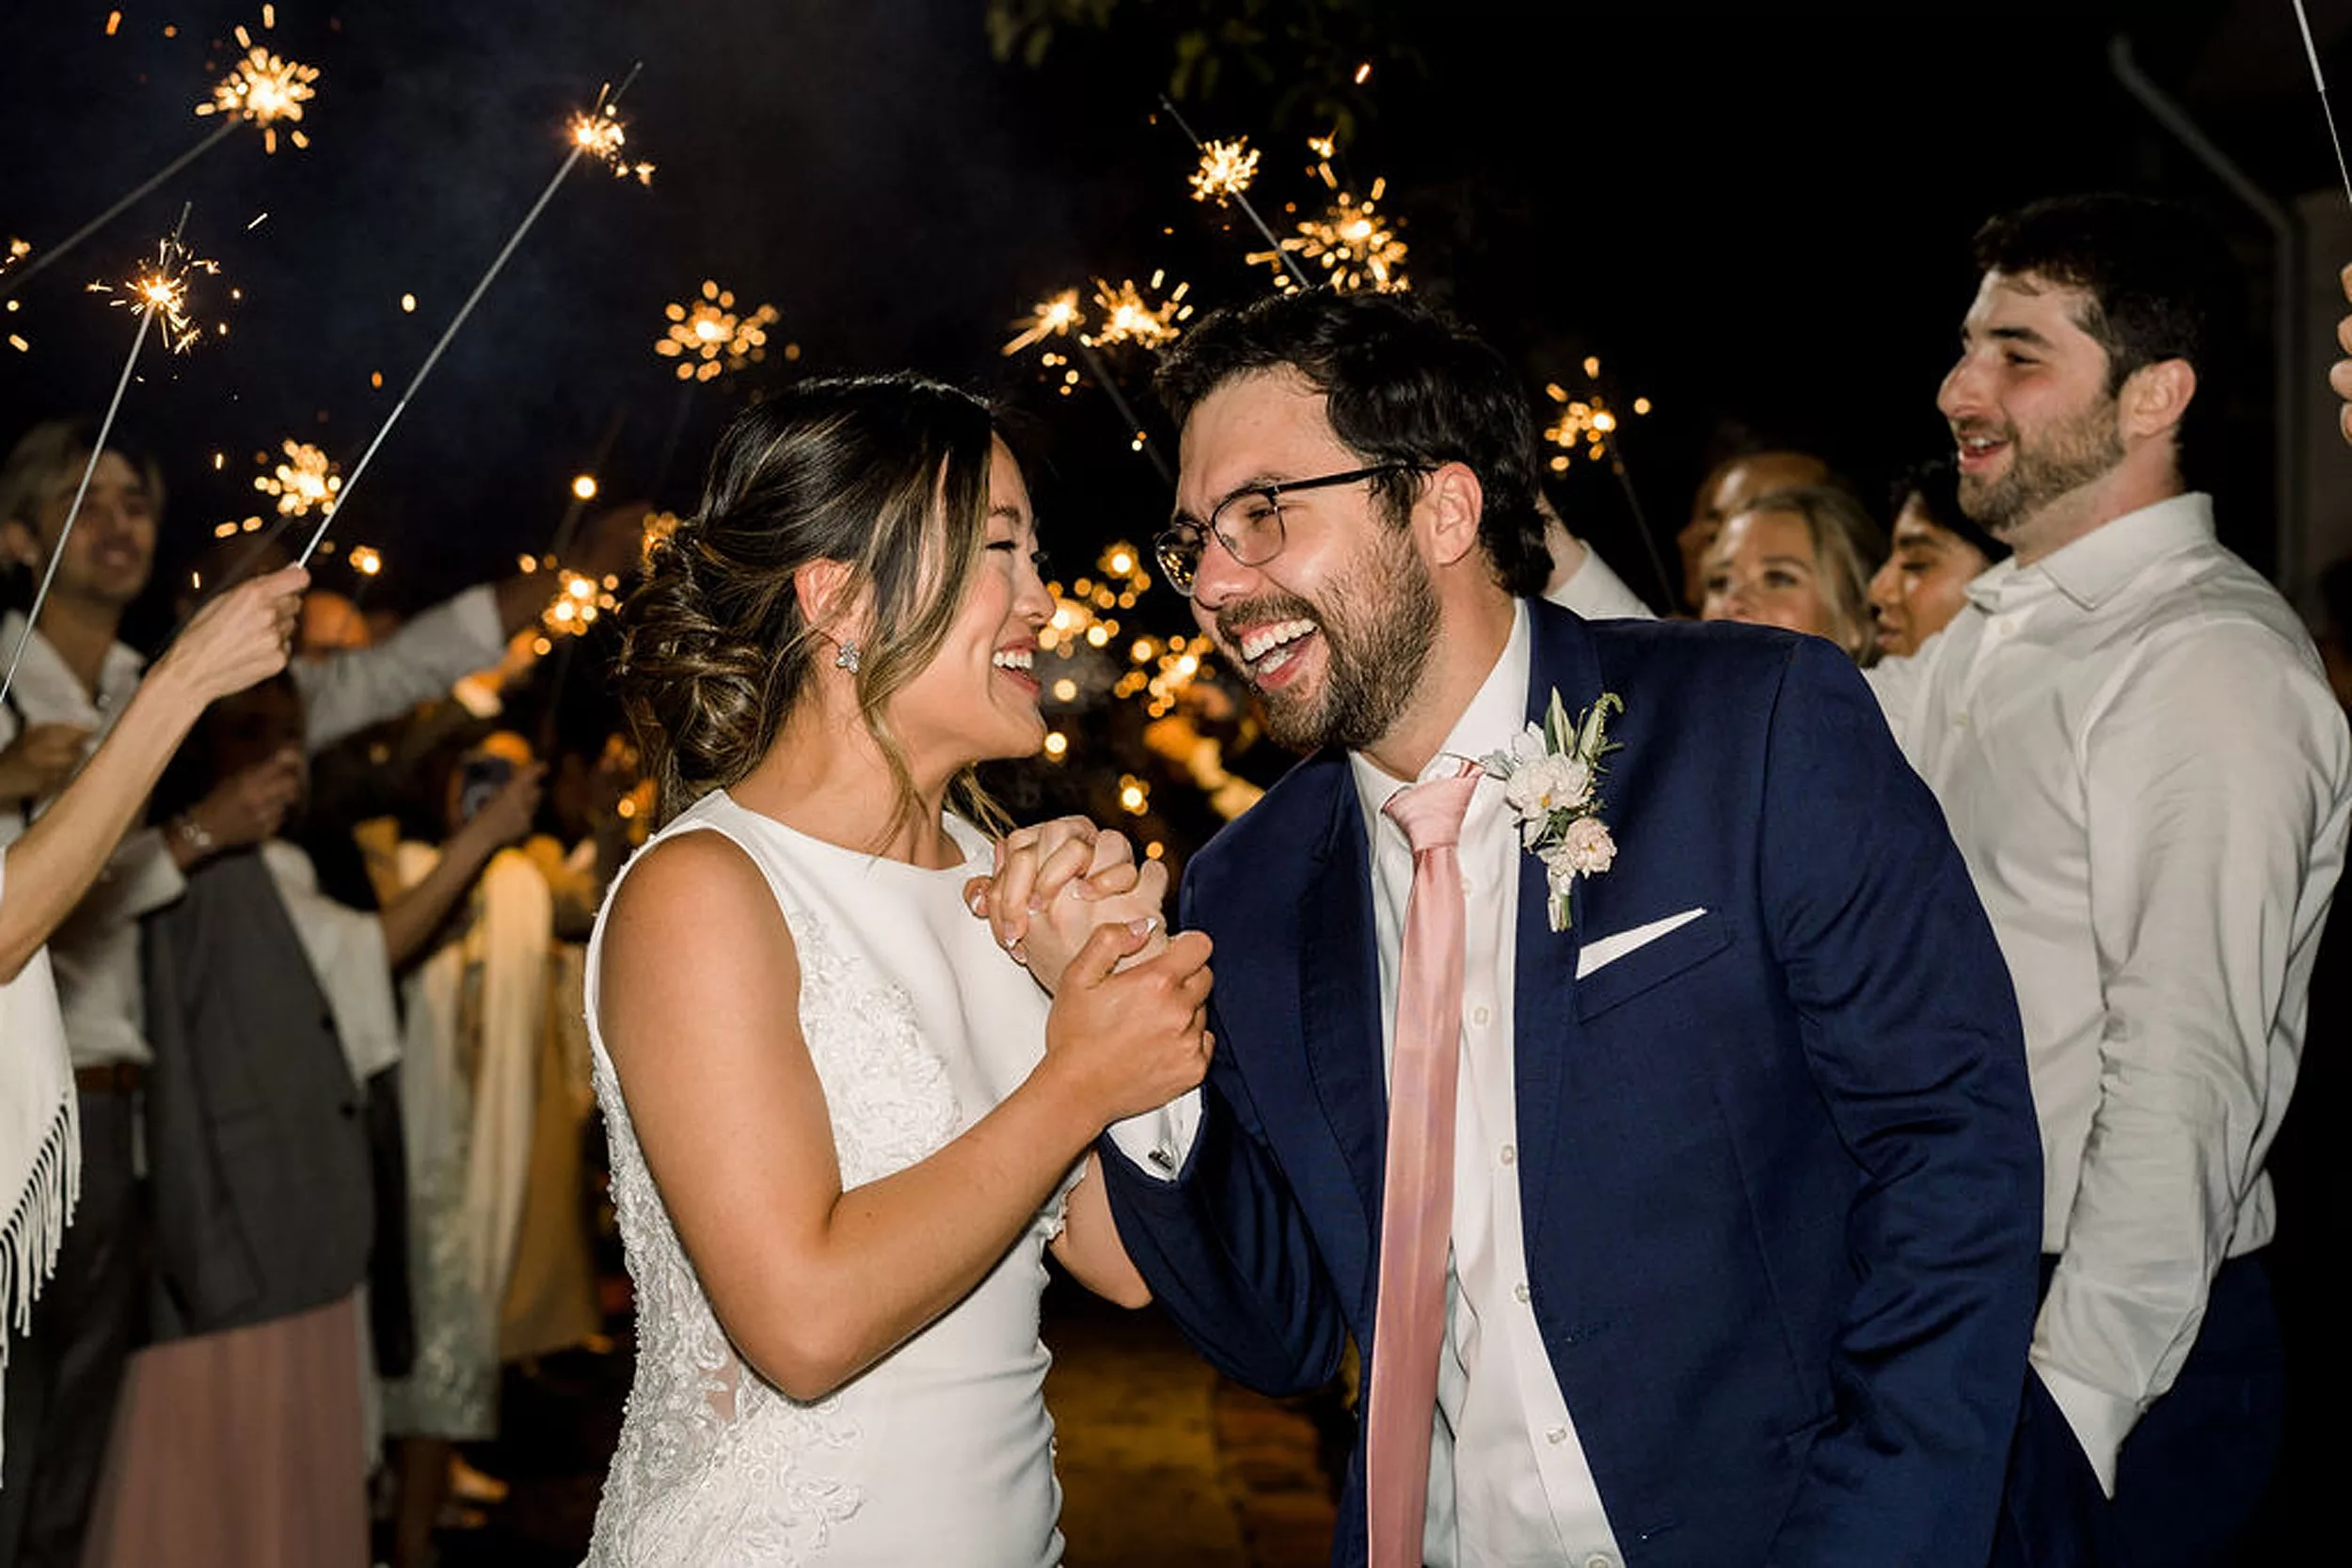 Newlyweds hold hands and laugh as they walk under a shower of sparklers being held up by their payne-corley house wedding guests